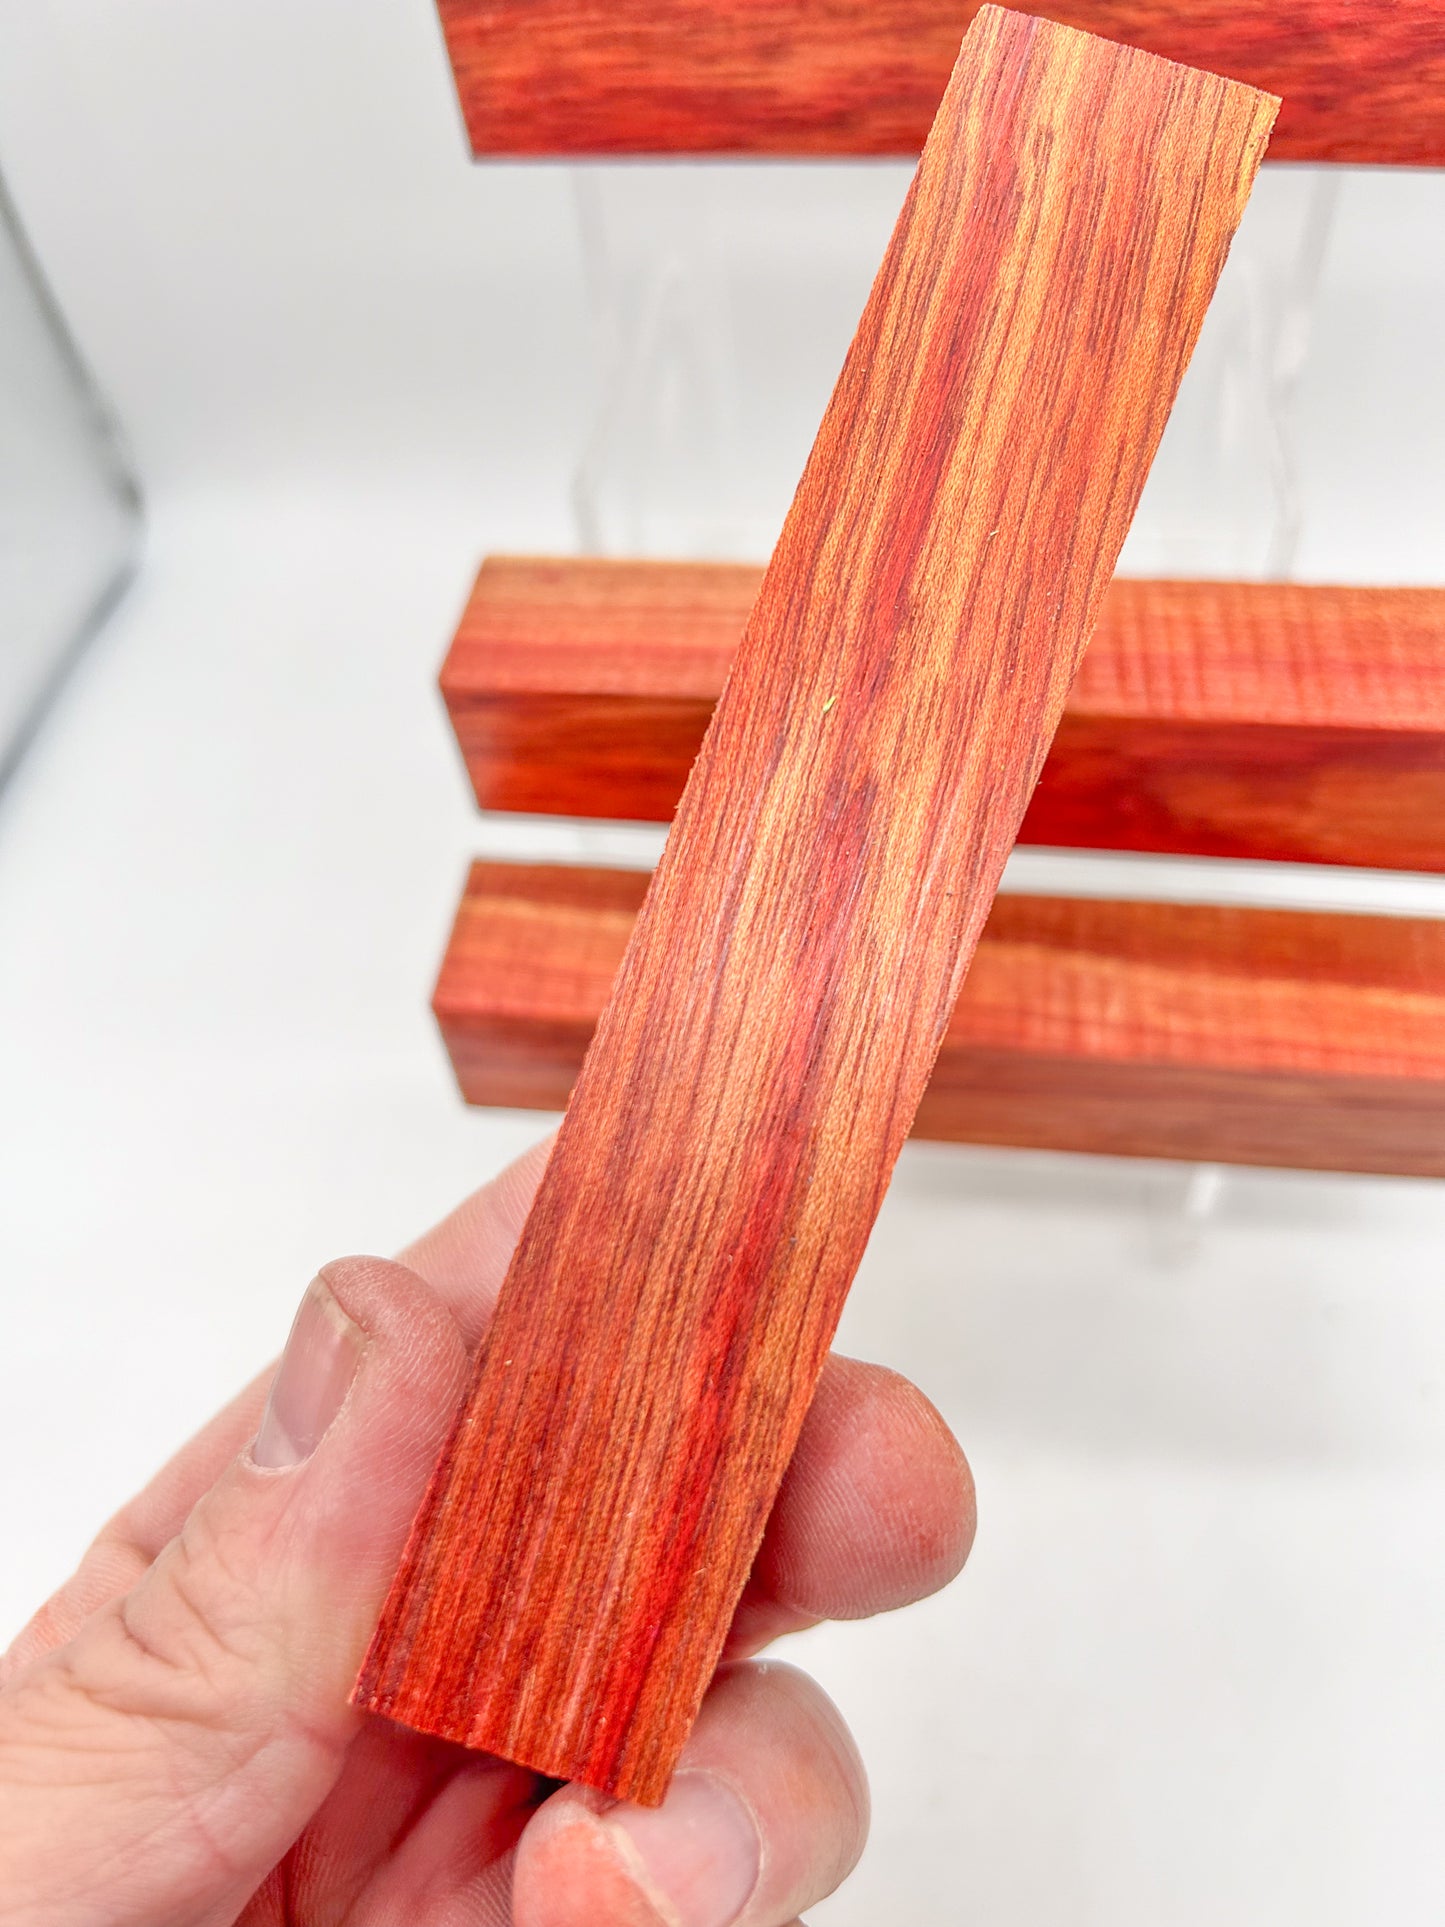 Bloodwood Wood | Deep Red & Highly Figured | South America | Wooden Pen Blanks